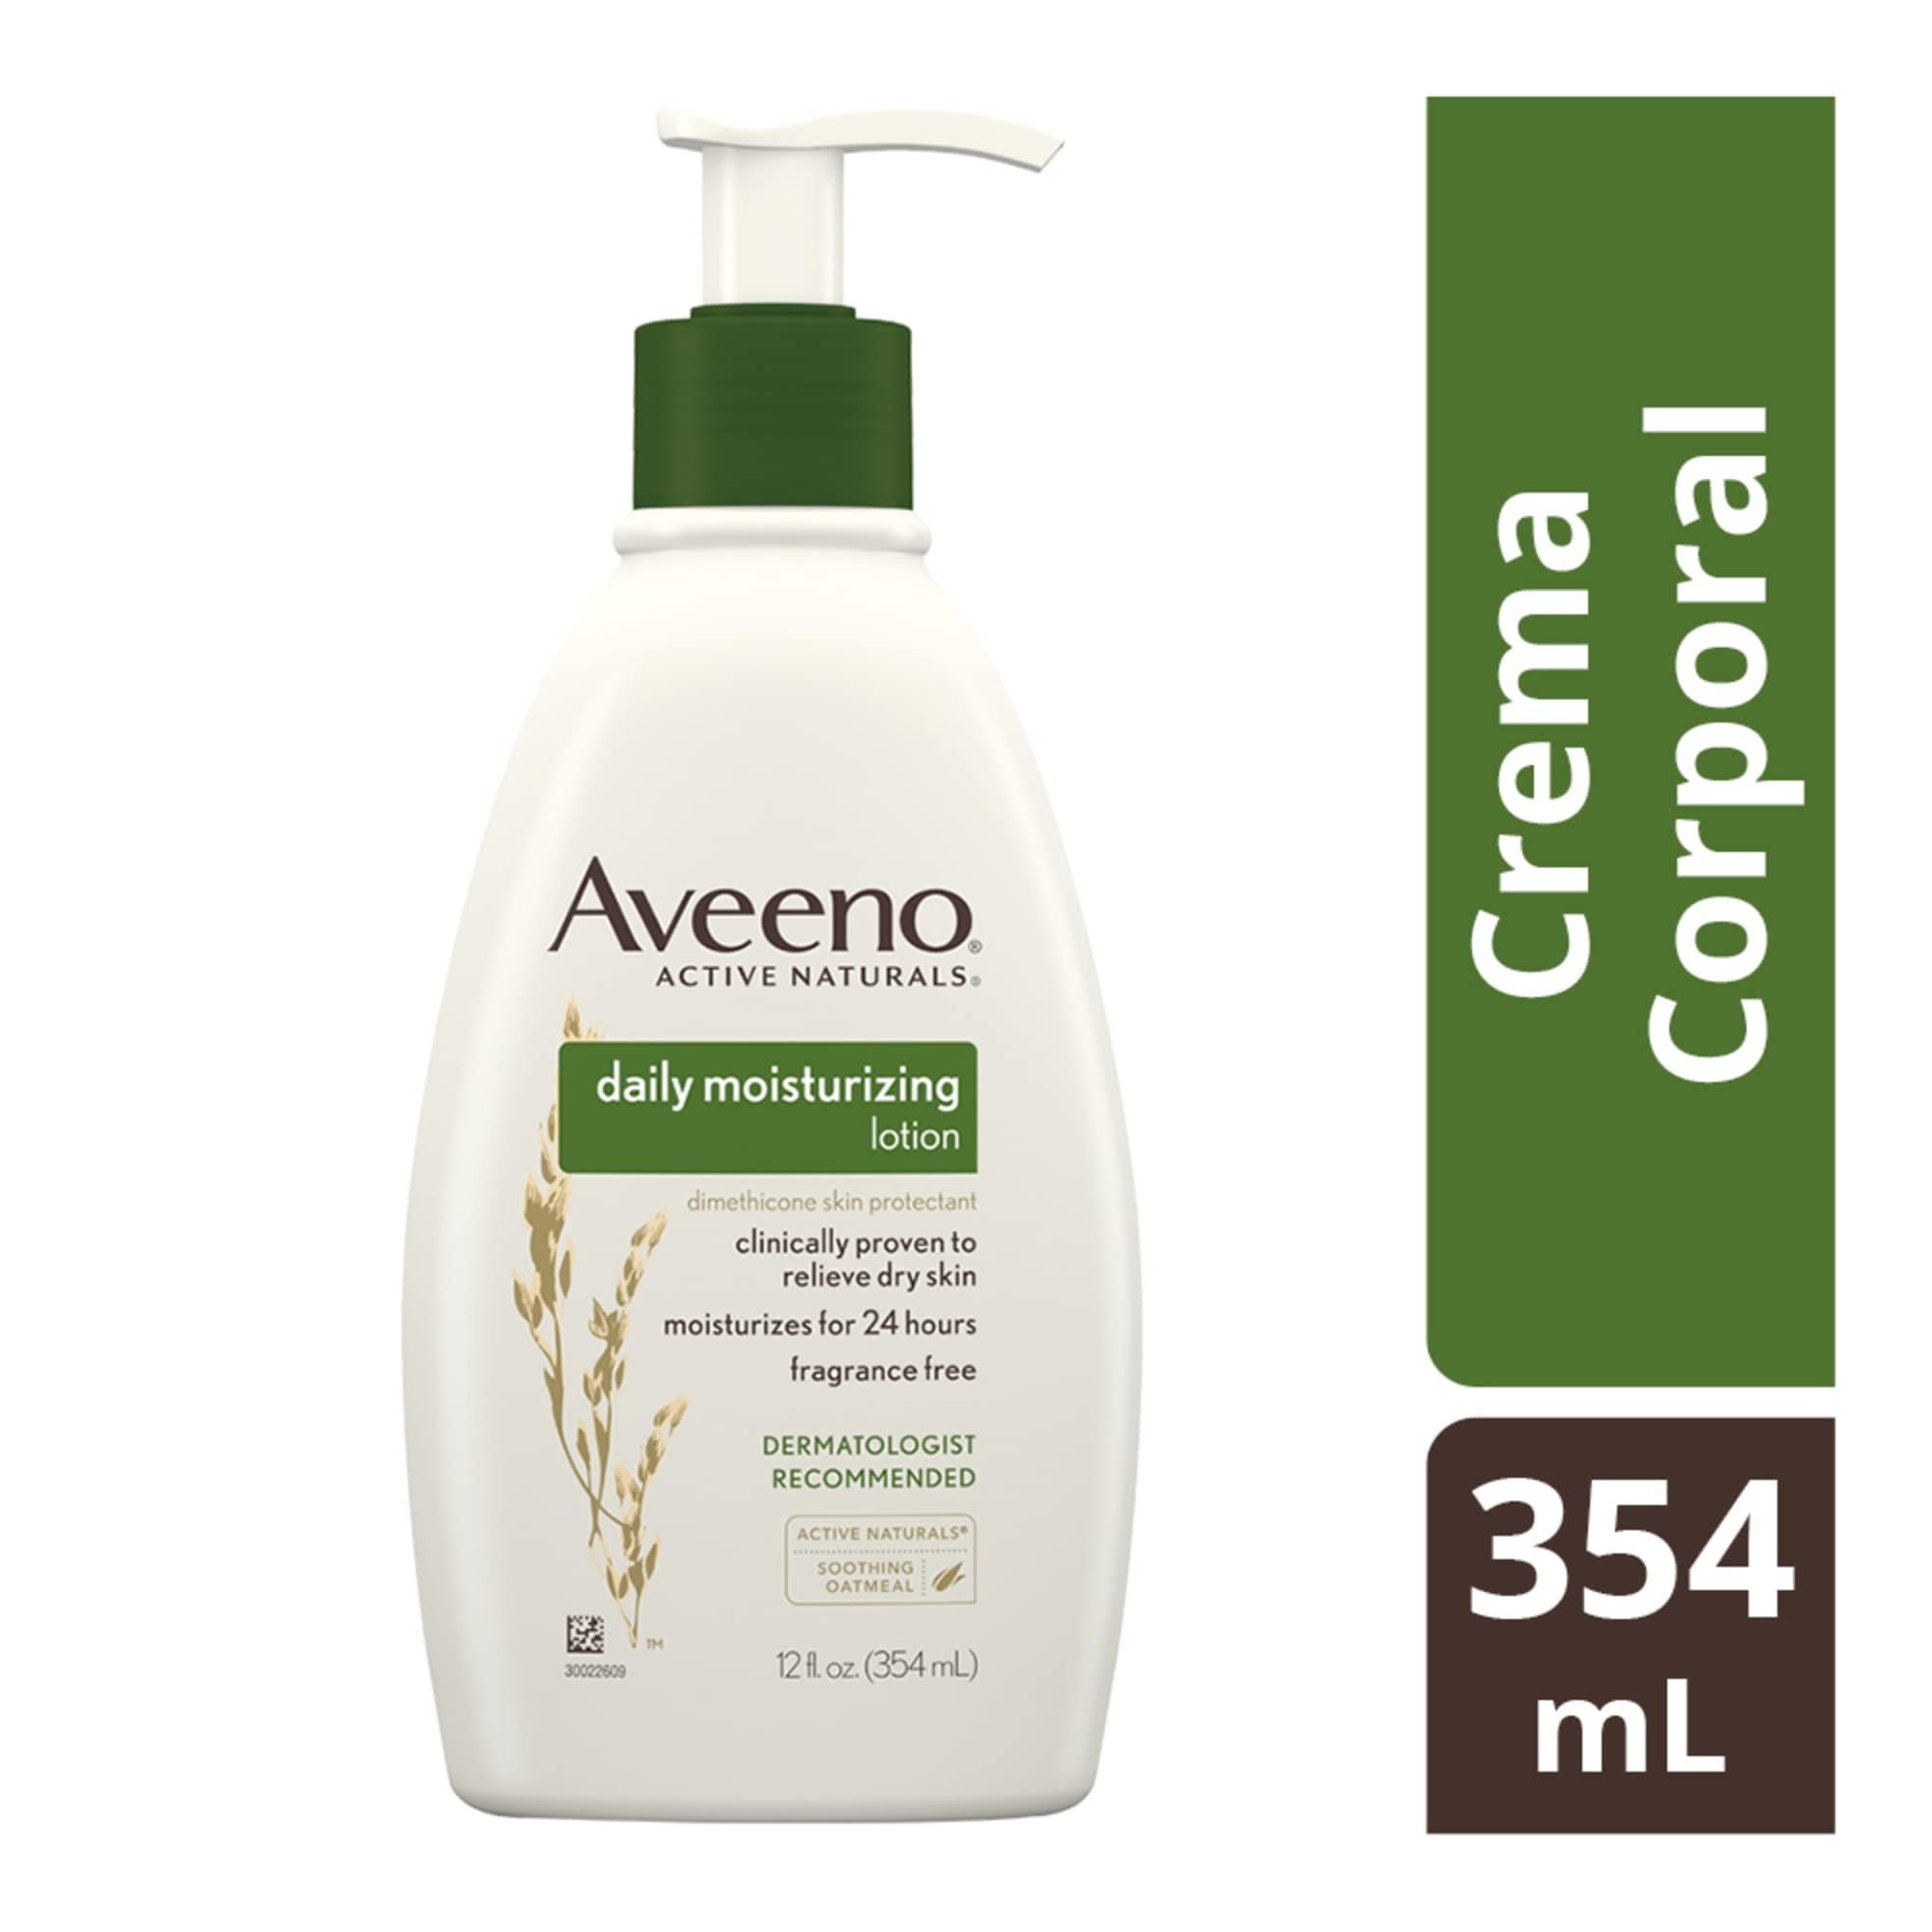 Aveeno Daily Moisturizing Body Lotion with Soothing Prebiotic Oat, Gentle Lotion Nourishes Dry Skin With Moisture, Paraben-, Dye- & Fragrance-Free, Non-Greasy & Non-Comedogenic, 12 fl. oz